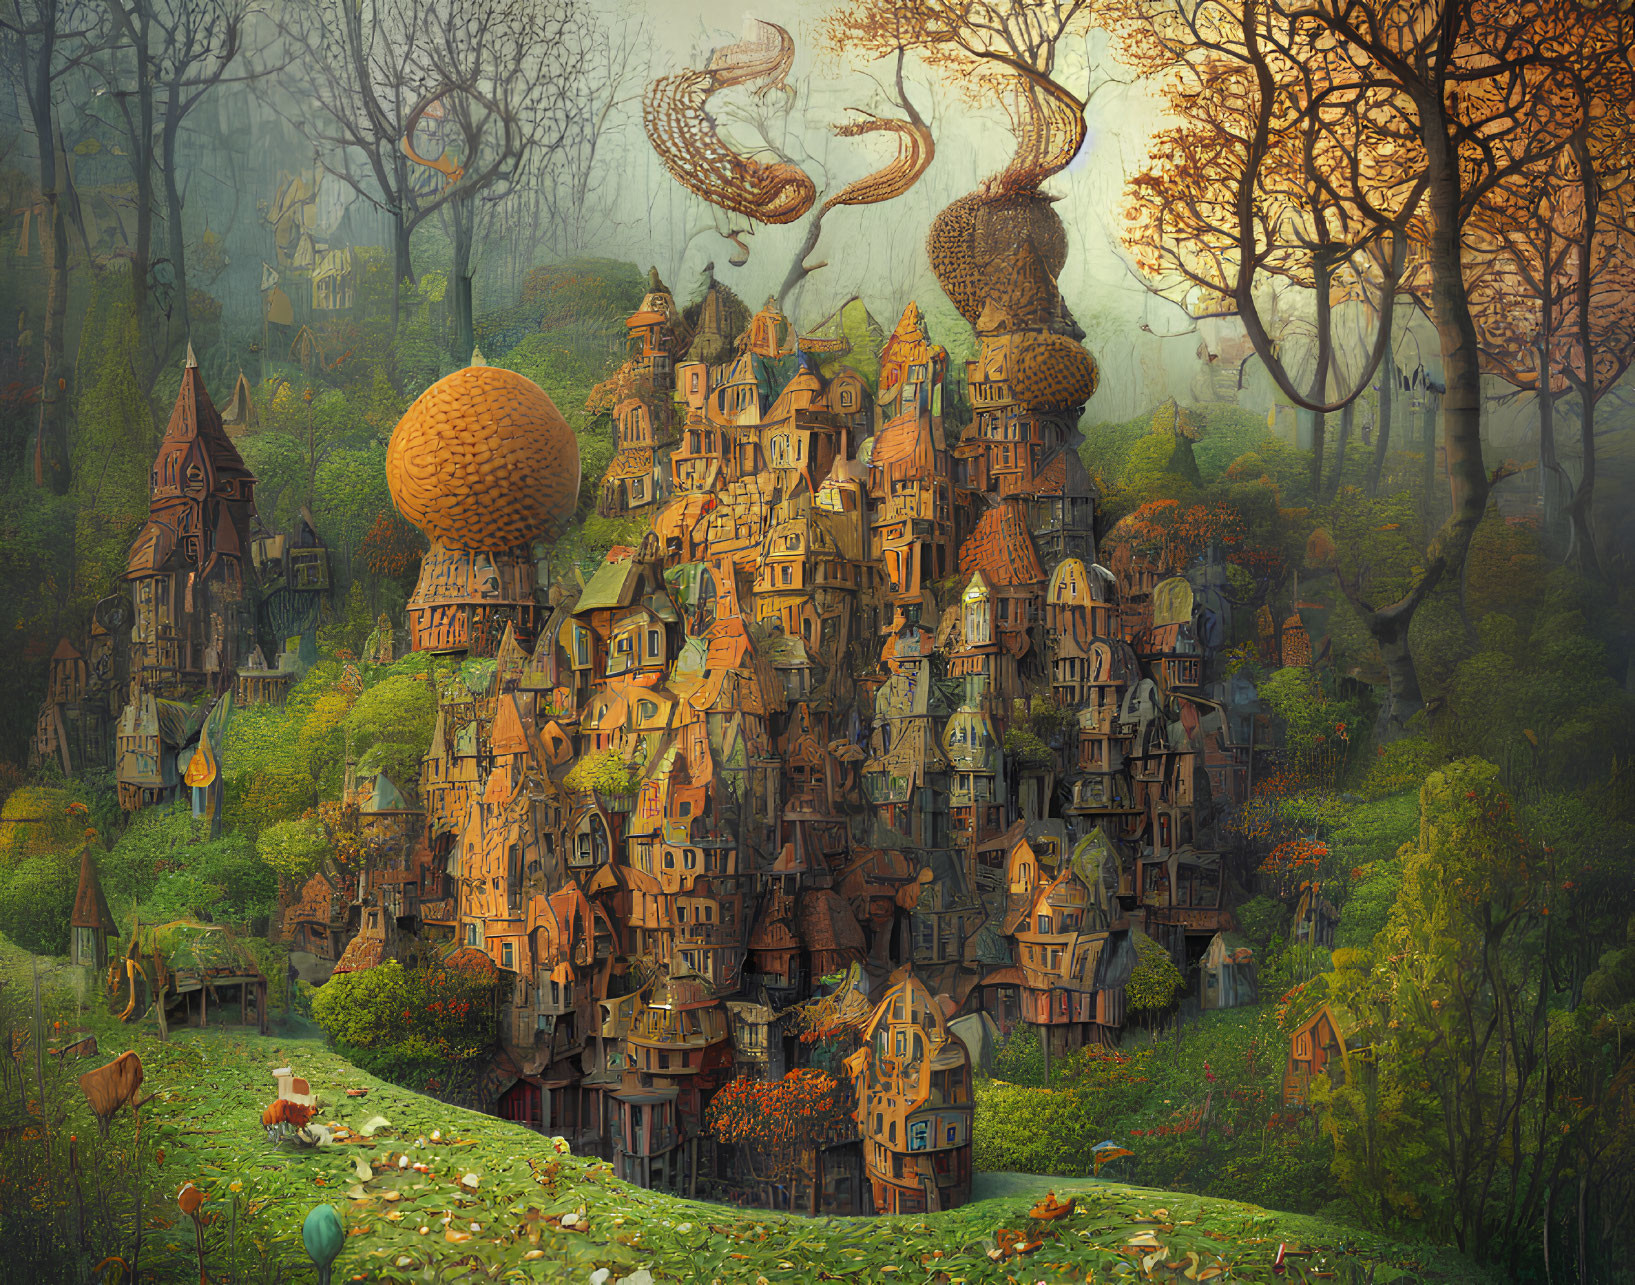 Fantastical Village with Whimsical Architecture in Autumnal Forest